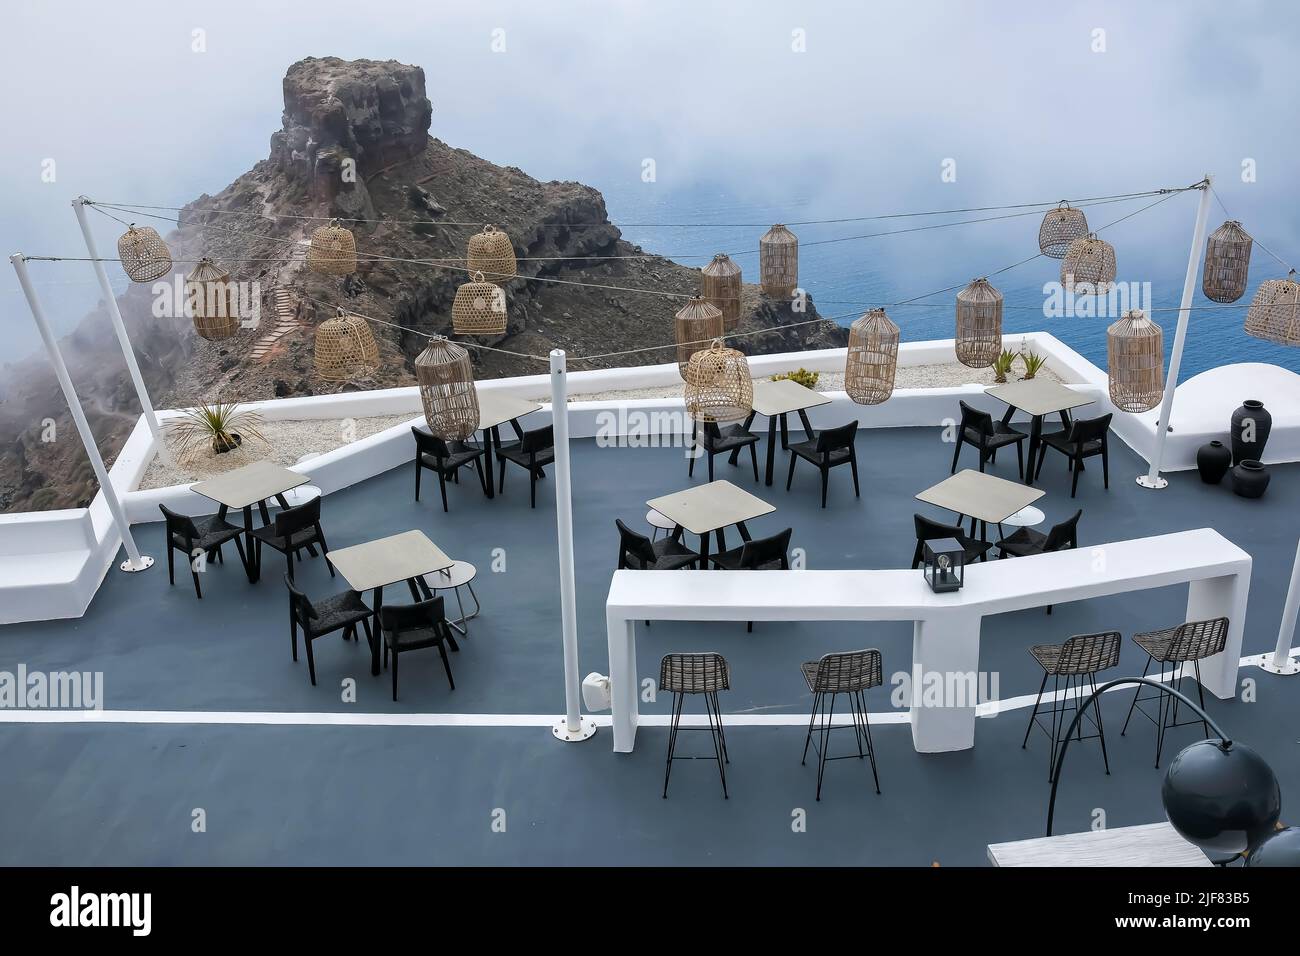 Santorini, Greece - May 13, 2021 :  View of a picturesque terrace decorated with tables, chairs  and lights overlooking a huge rock and the Aegean Sea Stock Photo